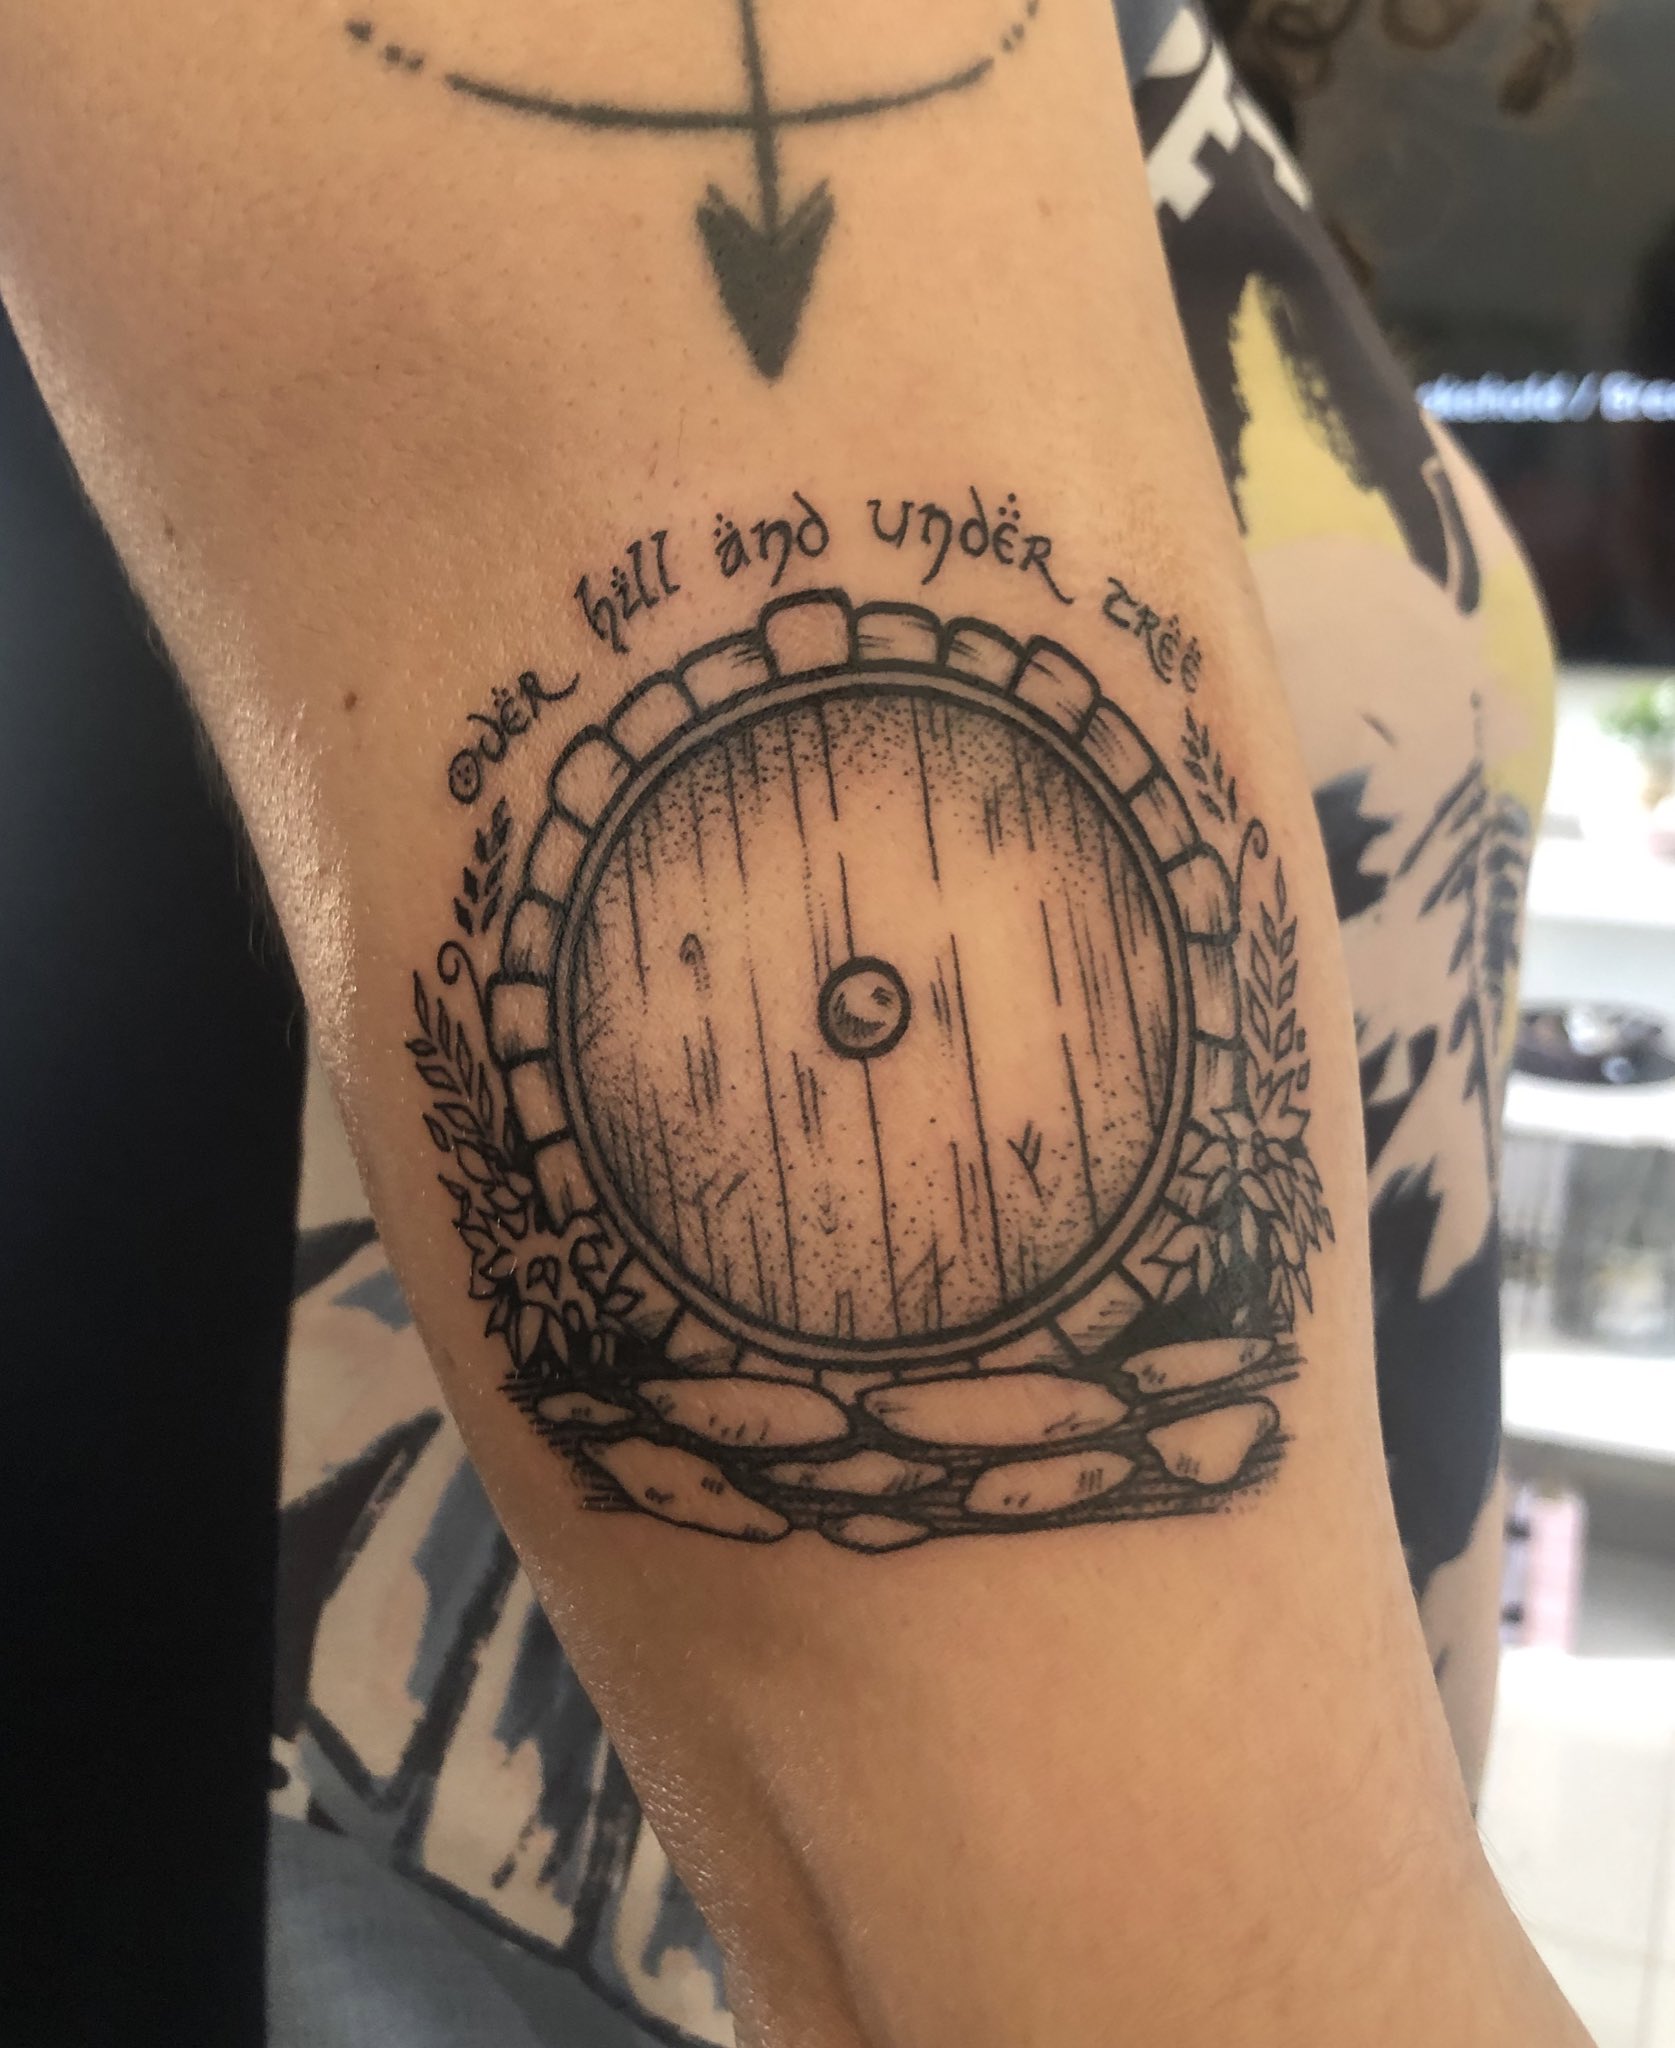 Lucky Bella Tattoos - “In a hole in the ground there lived a hobbit...” tag  a Lord of the Rings fan below! 👇 Tattoo by @unicornsniper . . . .  #hobbithole #hobbit #